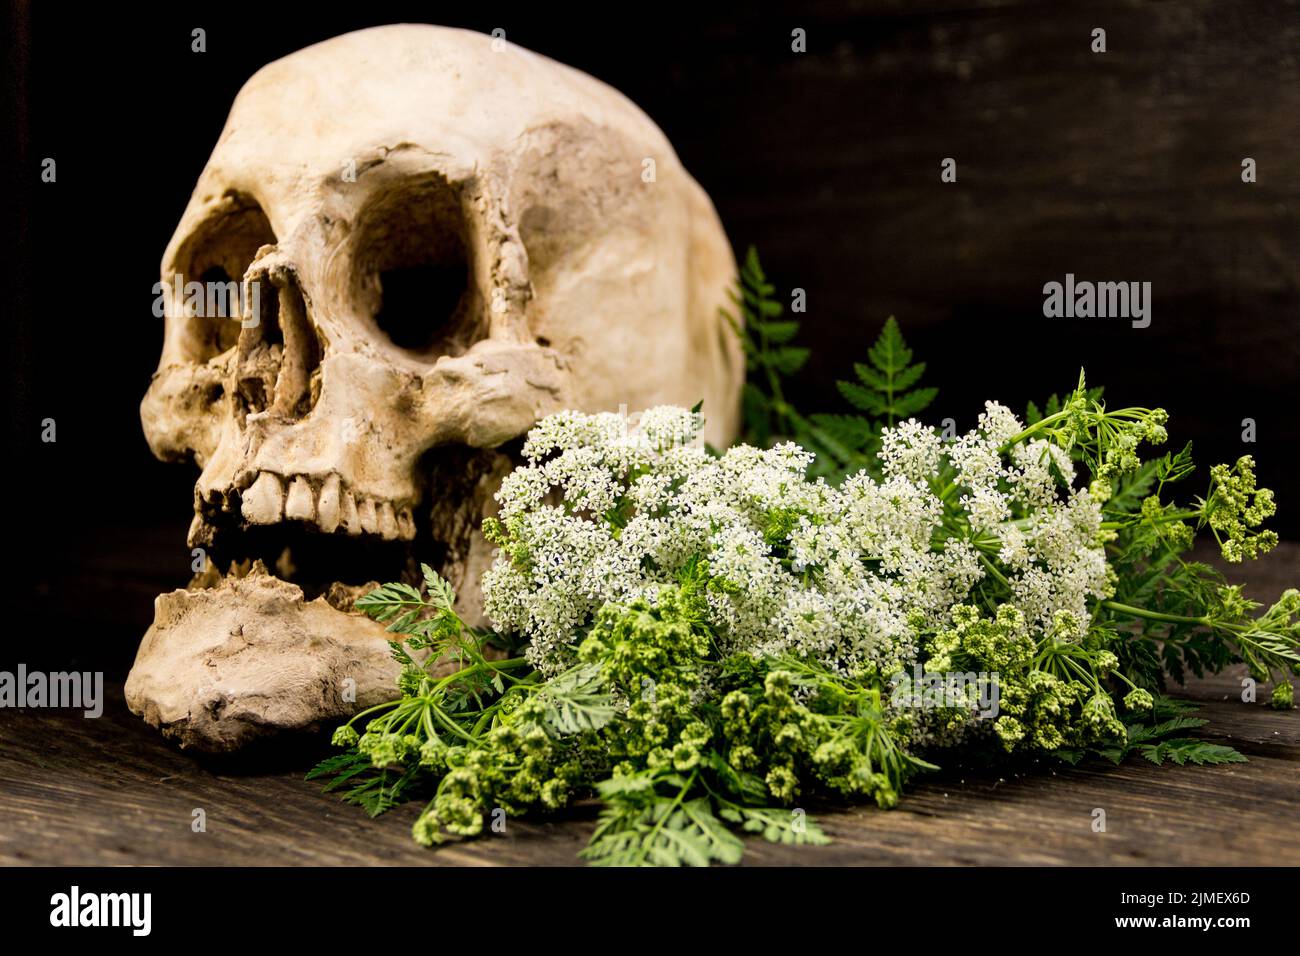 A bouquet of hemlock flowers with a human skull Stock Photo